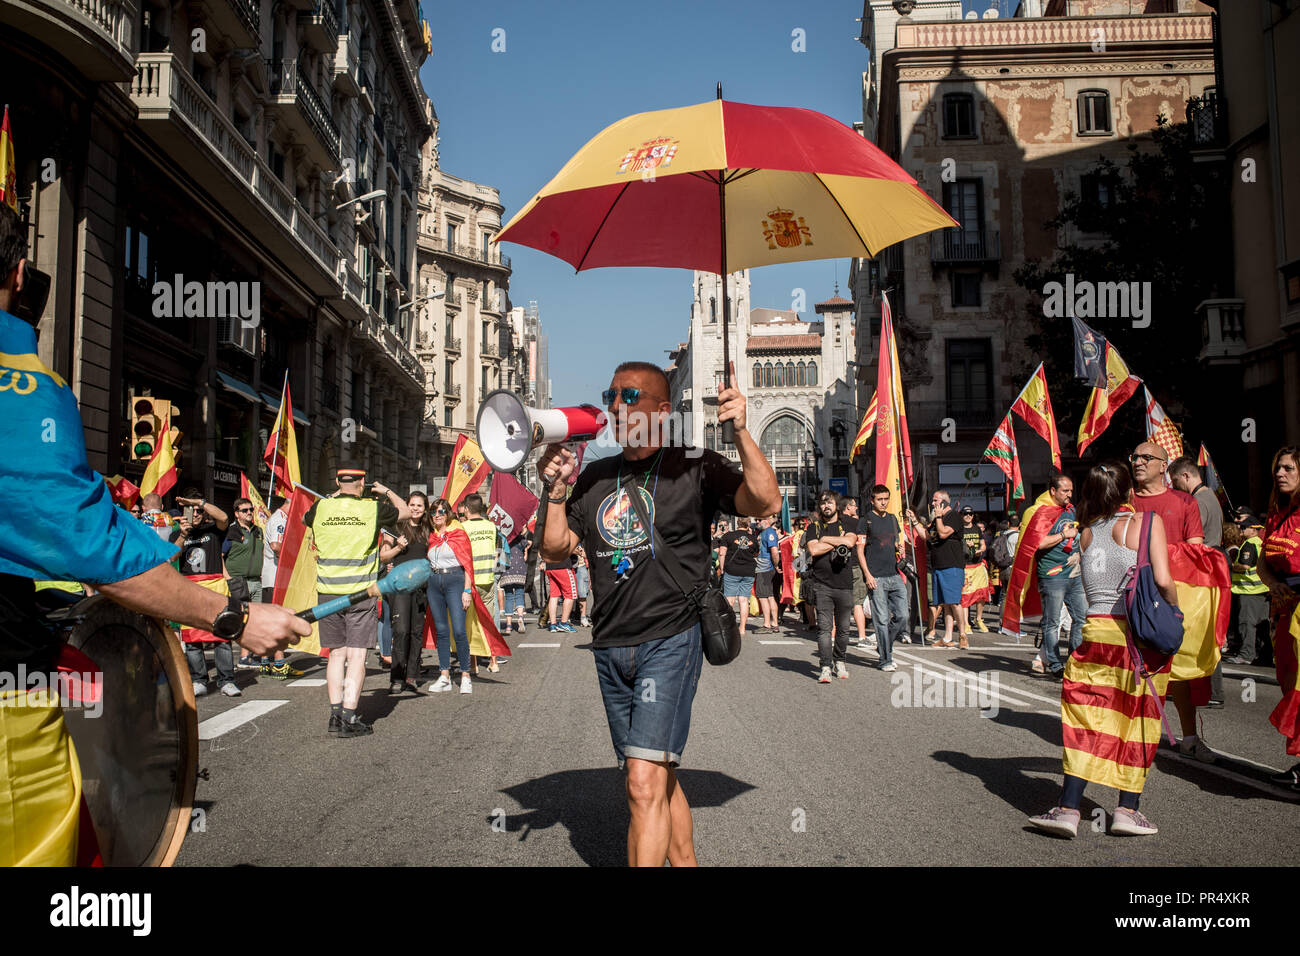 September 29, 2018 - Barcelona, Catalonia, Spain -  A man carrying and umbrella with the spanish flag colors shouts slogans during a Spanish police demonstration in Barcelona. Members and supporters of Spanish police Guardia Civil and Policia Nacional marched by Barcelona streets demanding salary improvements and in tribute to the participation against the Catalan referendum of independence a year ago. Stock Photo